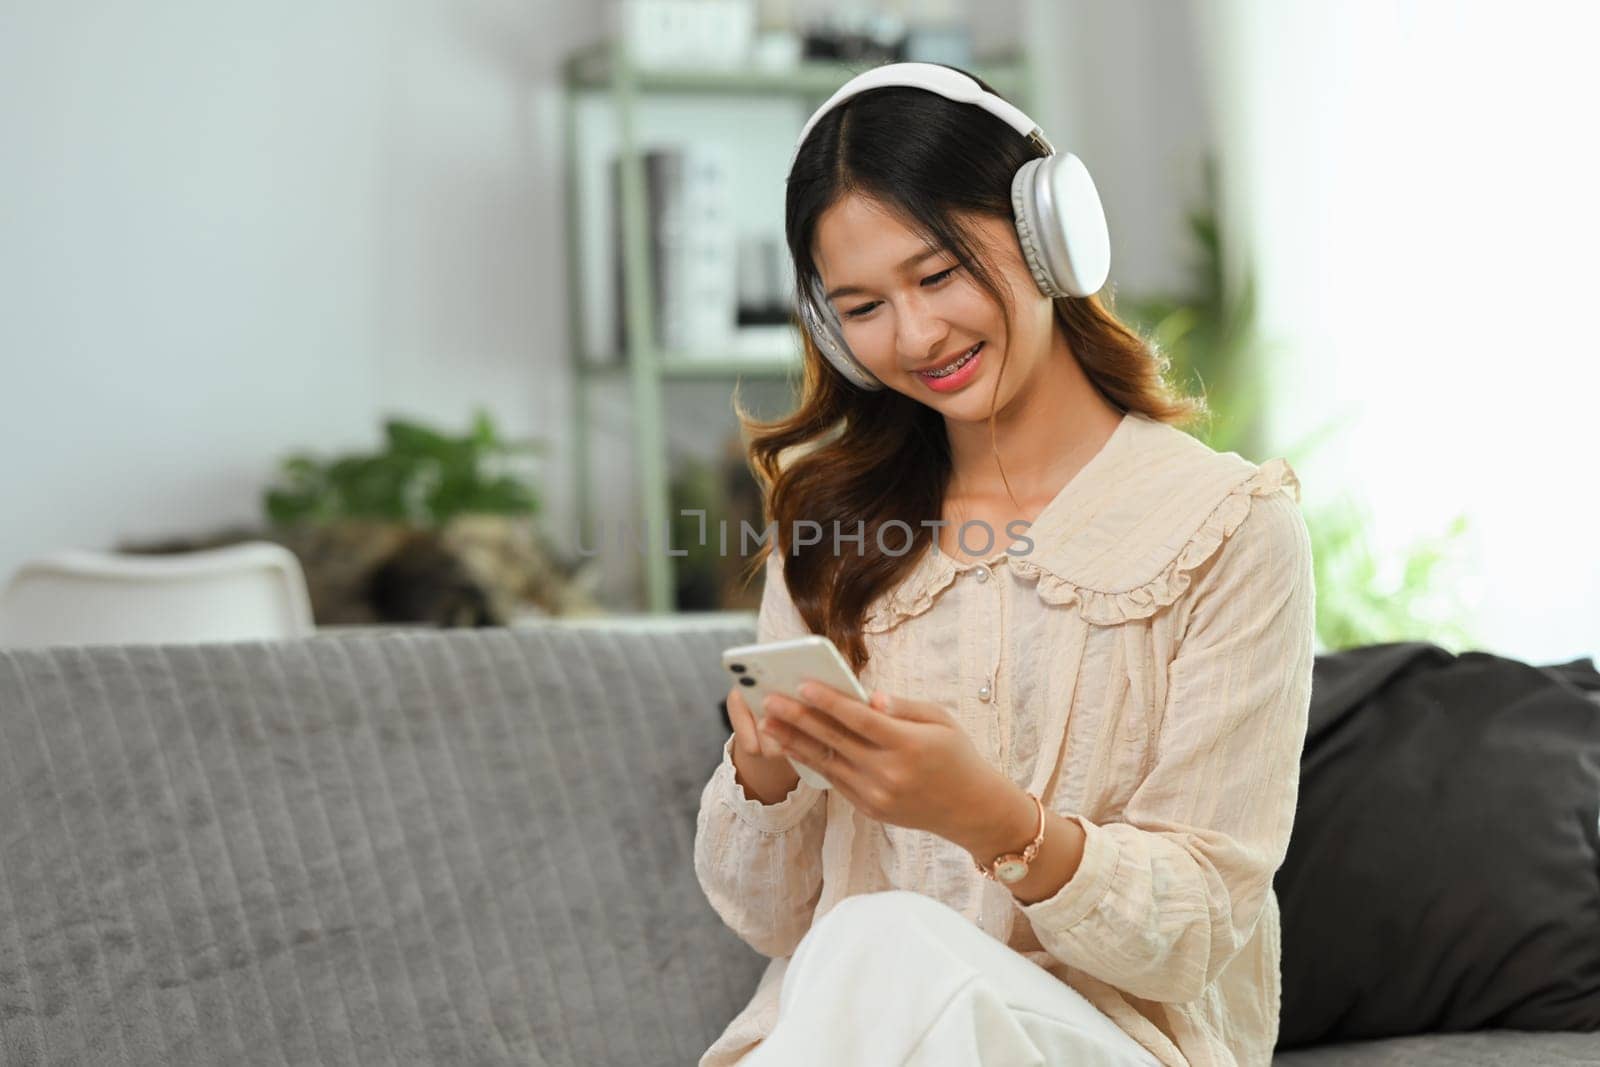 Cheerful young woman wearing headphone using mobile phone on couch at home. by prathanchorruangsak